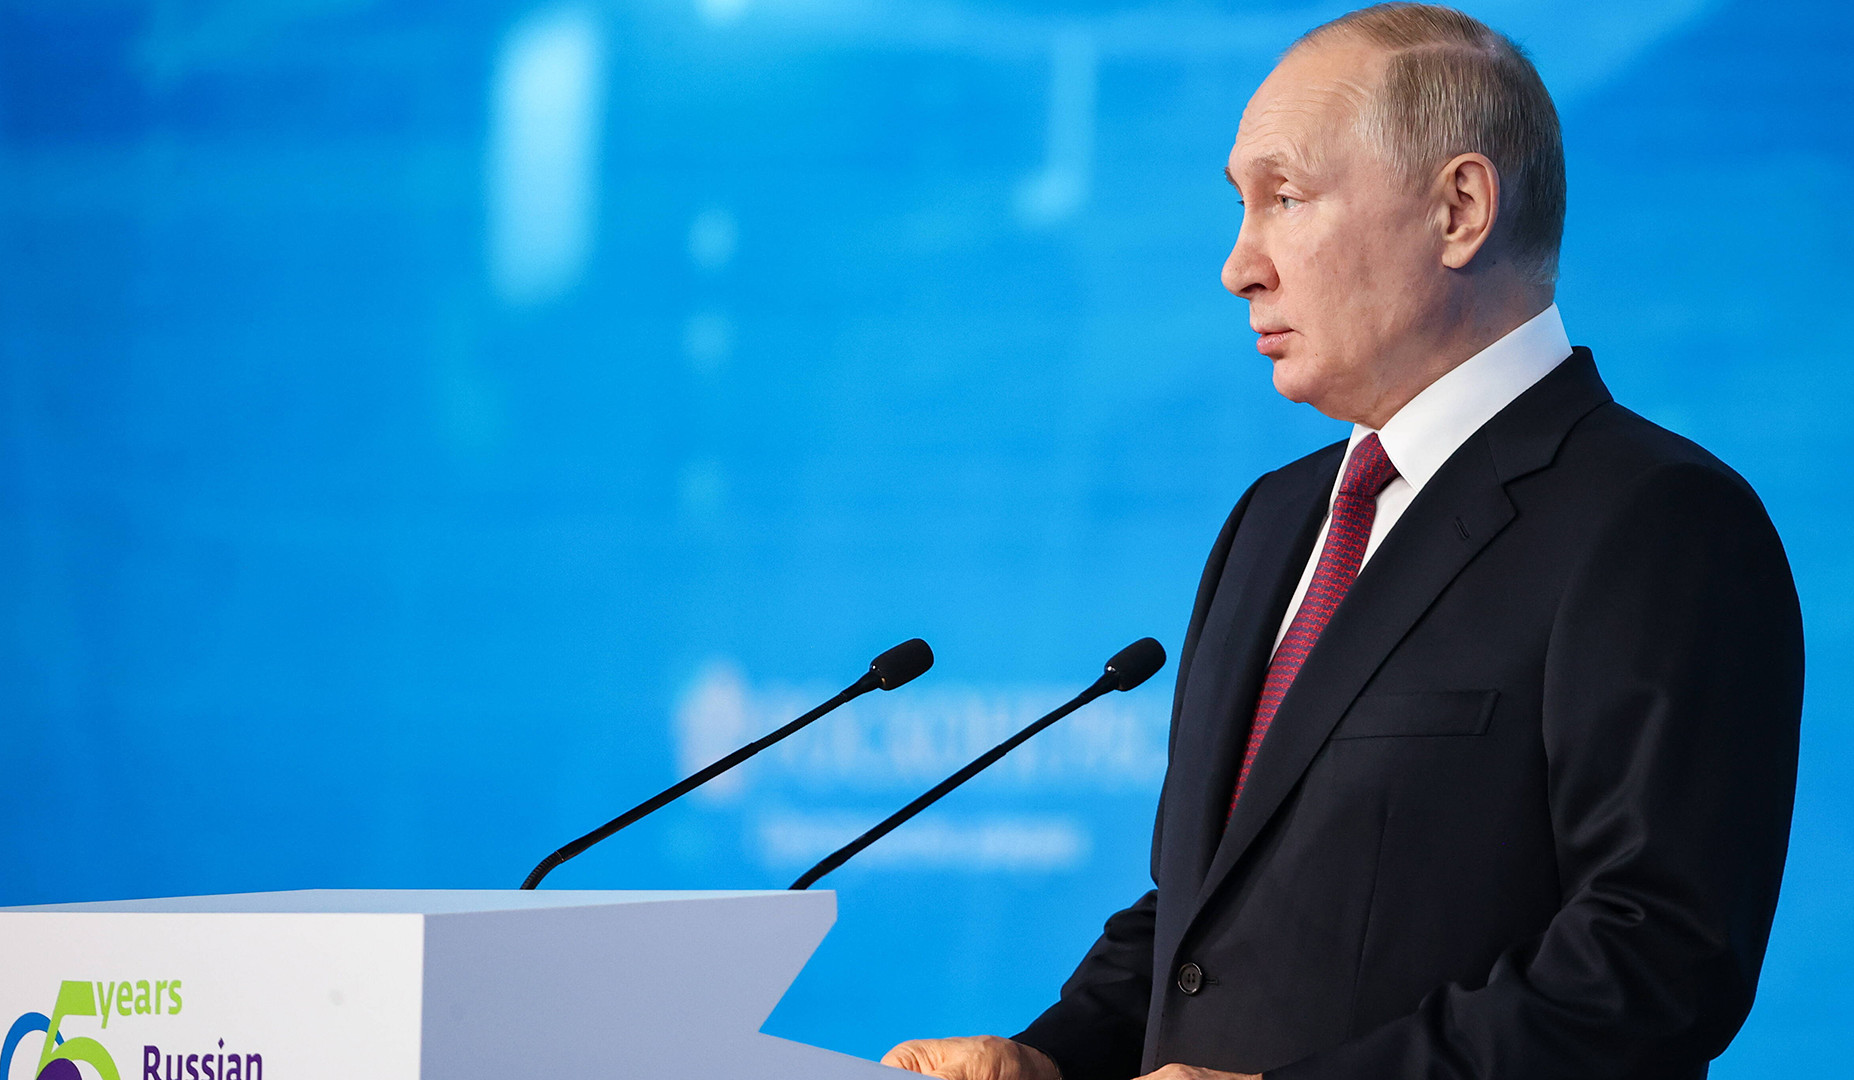 Russia to hold oil exports and production at current levels until 2025: Putin